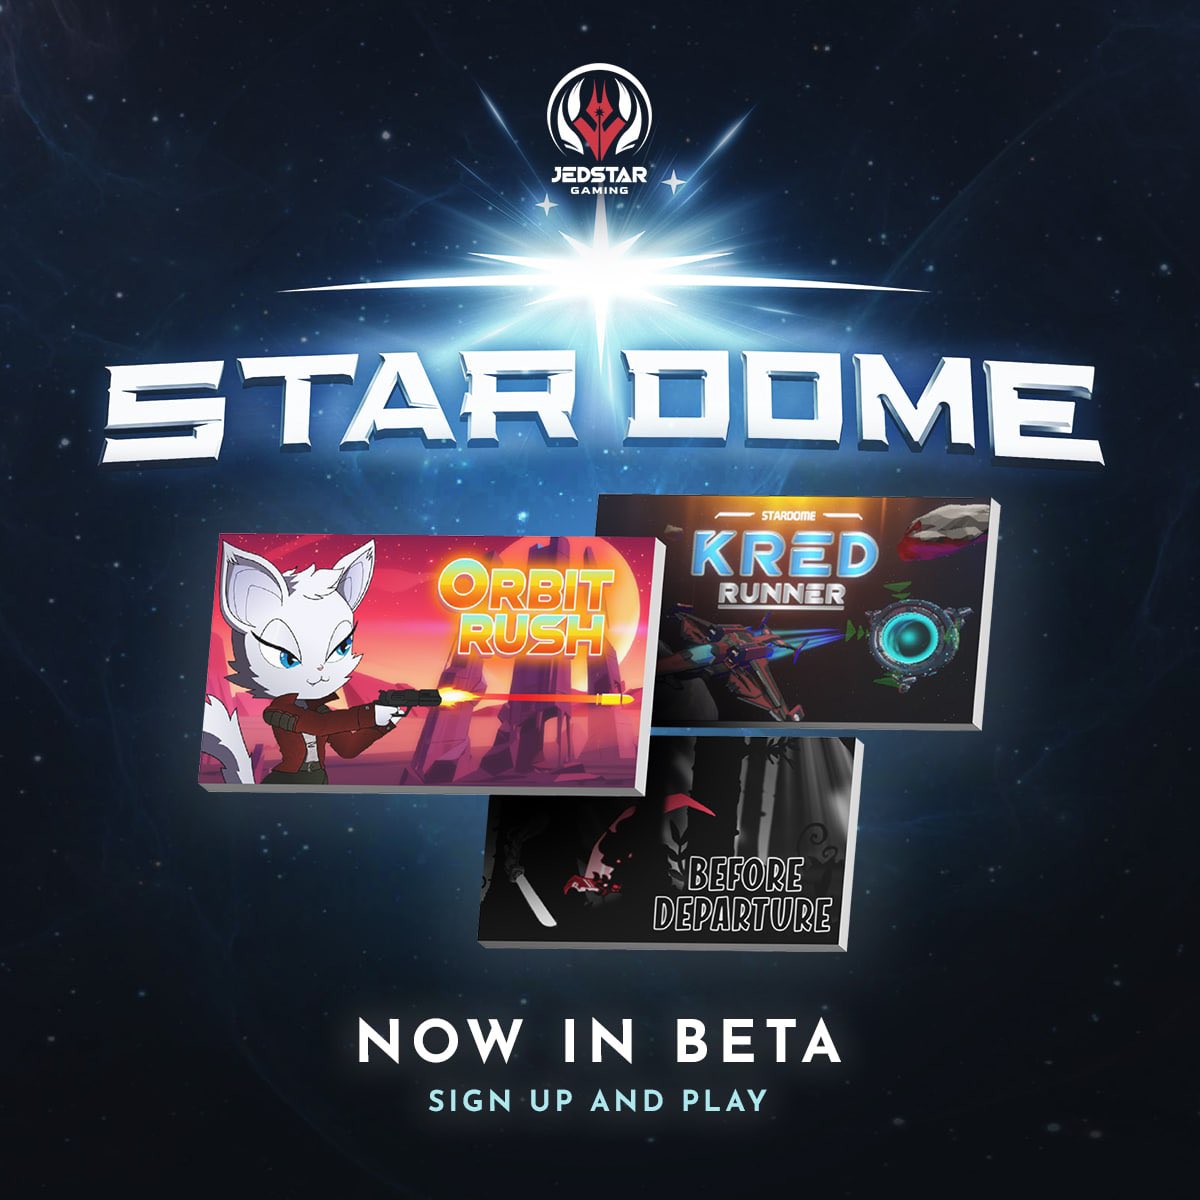 📣 Share your STARDOME gaming achievements with the us! Tag us and use #STARDOME to be featured on our social media 🤳 #JEDSTARgaming

ow.ly/mvEw50OMJXj